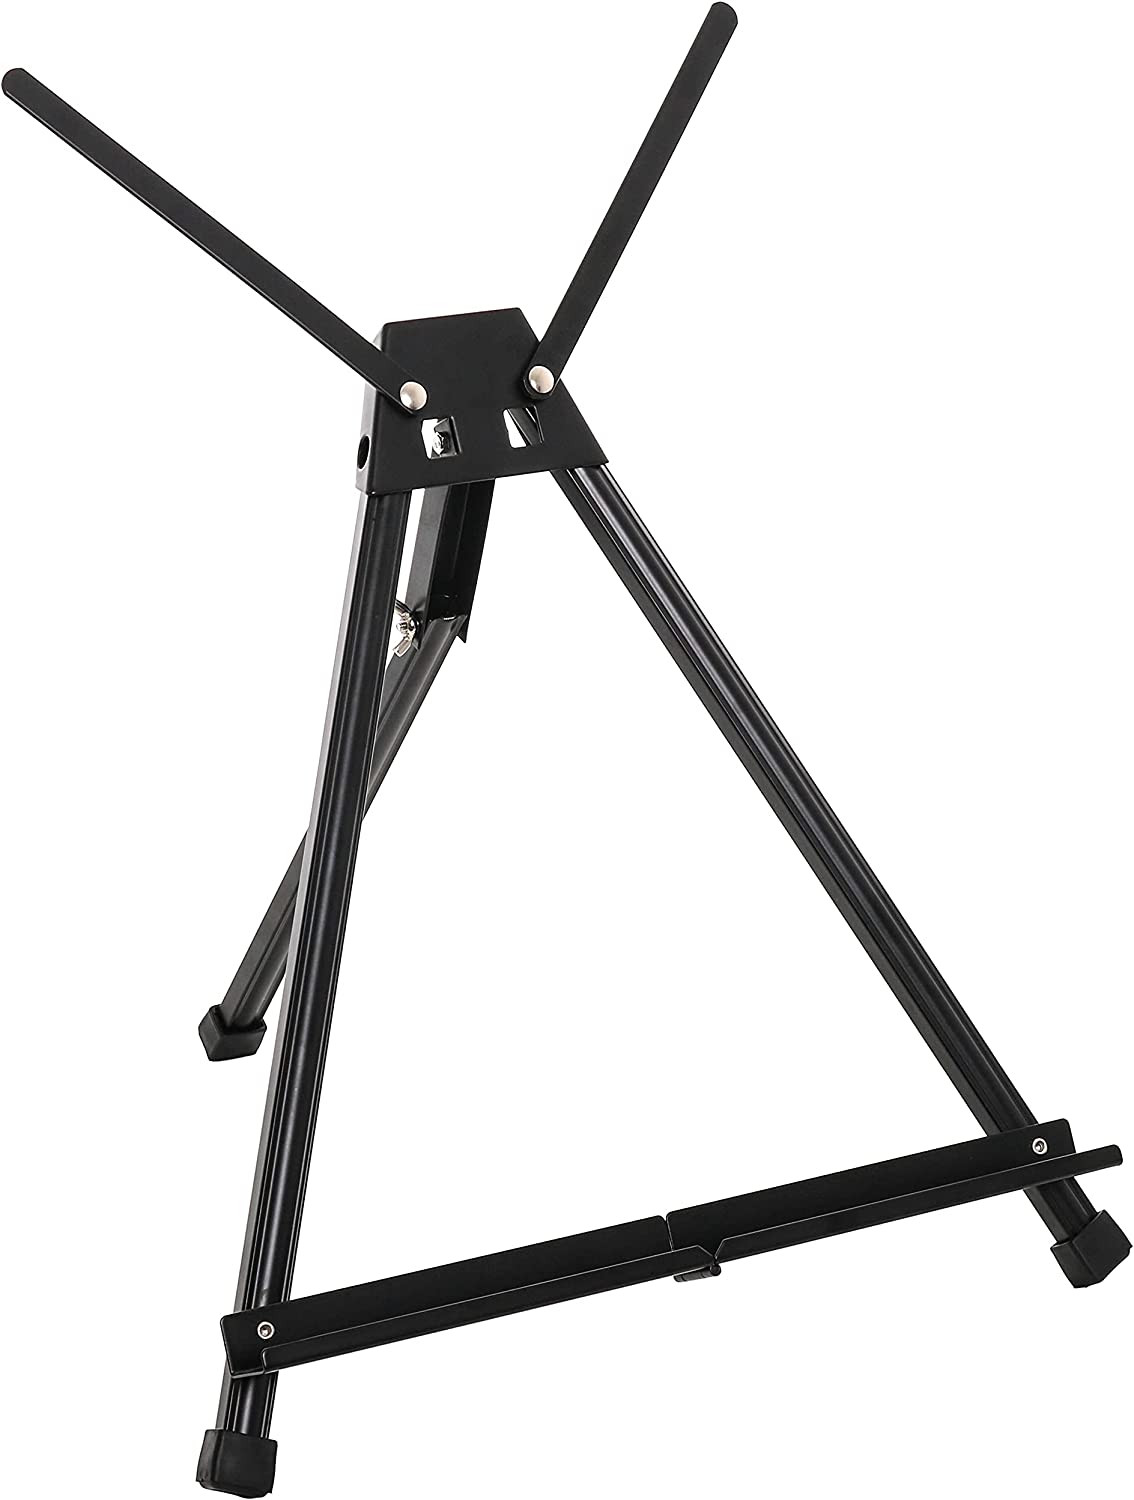 U.S. Art Supply 15″ to 21″ High Adjustable Black Aluminum Tabletop Display Easel with Extension Arm Wings – Portable Artist Tripod Folding Frame Stand – Holds Canvas, Paintings, Books, Photos, Signs